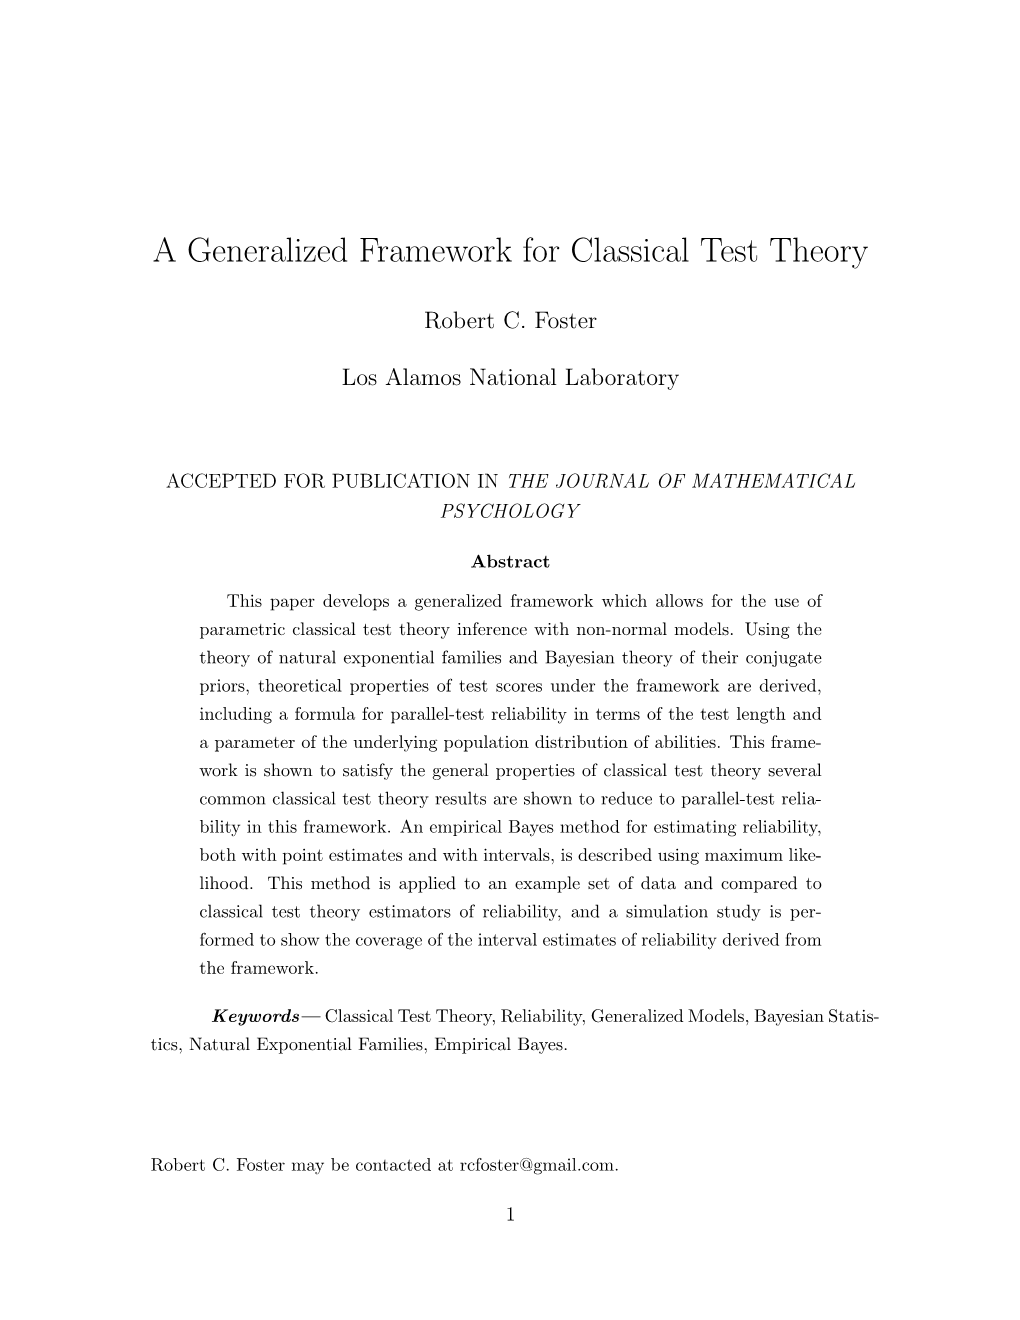 A Generalized Framework for Classical Test Theory